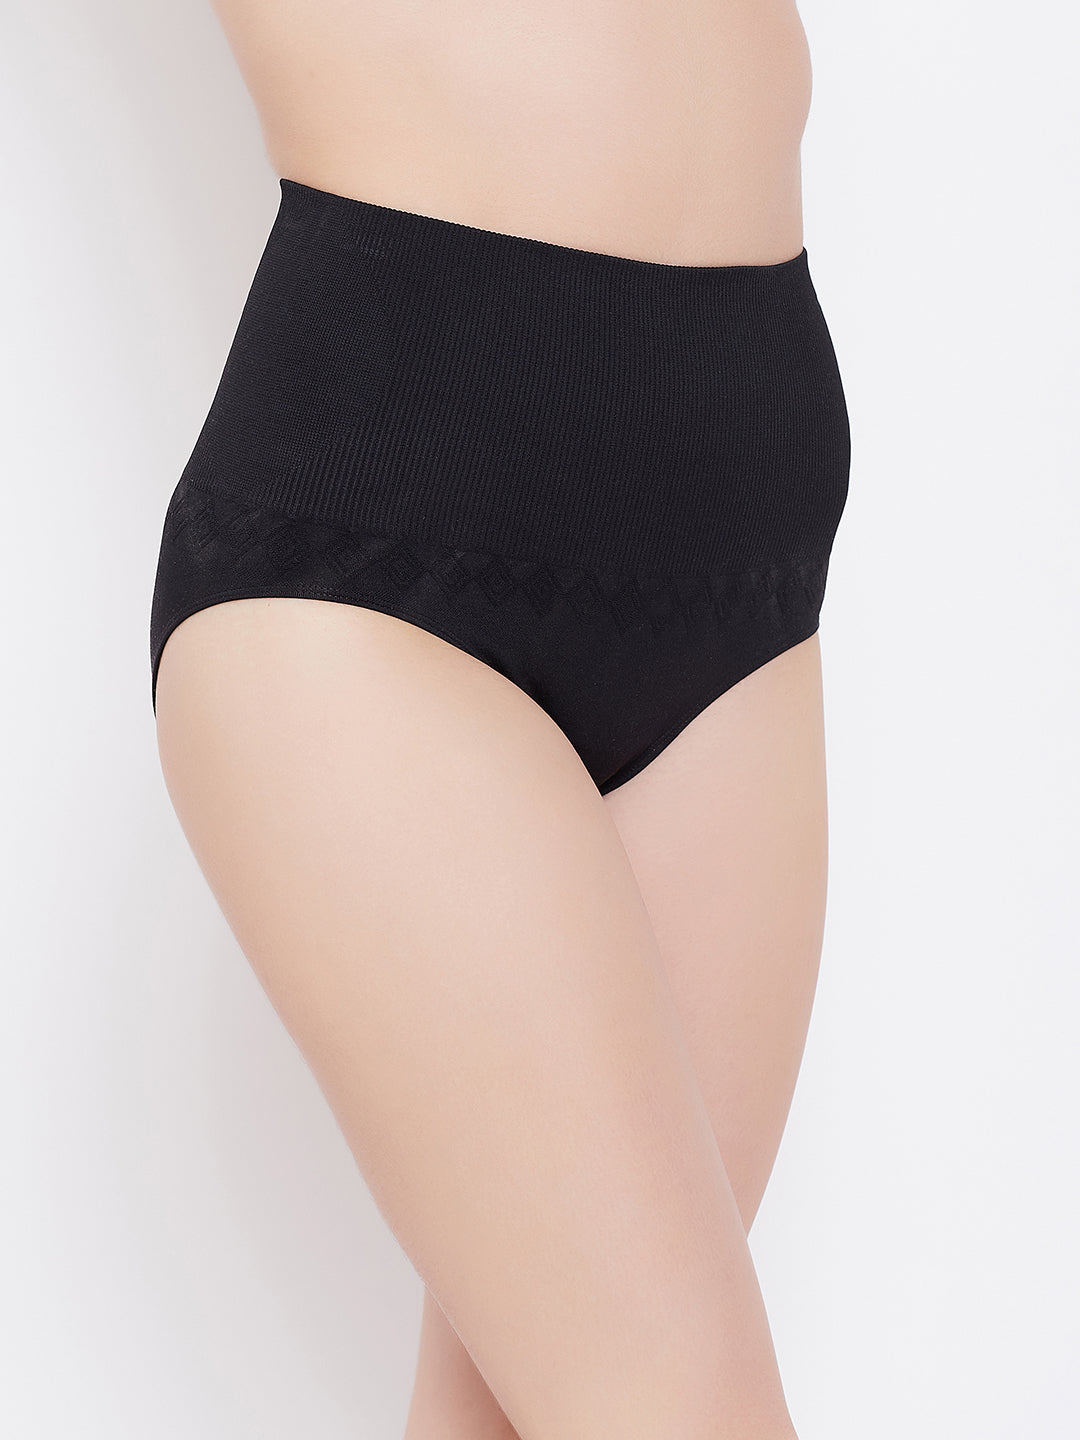 Buy C9 Airwear Seamless Ribbed Panty for Girls (M, Ccyan) at